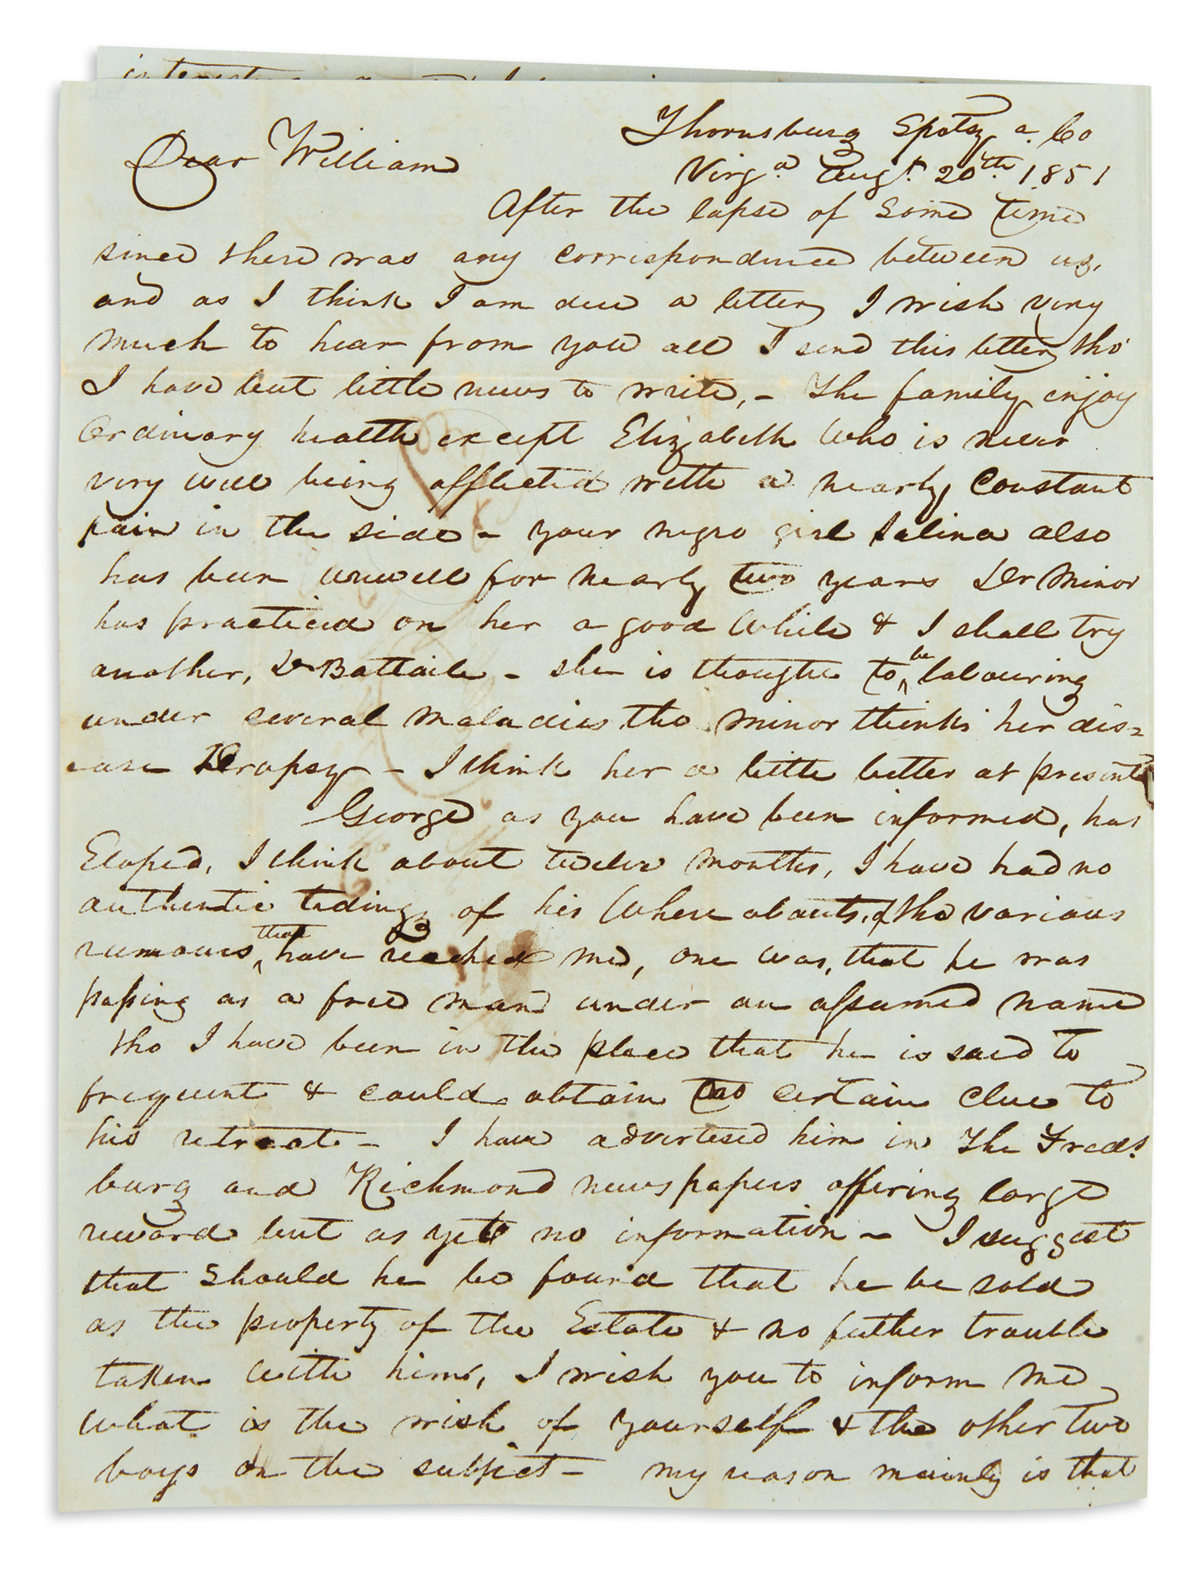 (SLAVERY AND ABOLITION.) McCalley, John W. Letter describing an escaped slave and the circumstances surrounding his flight.